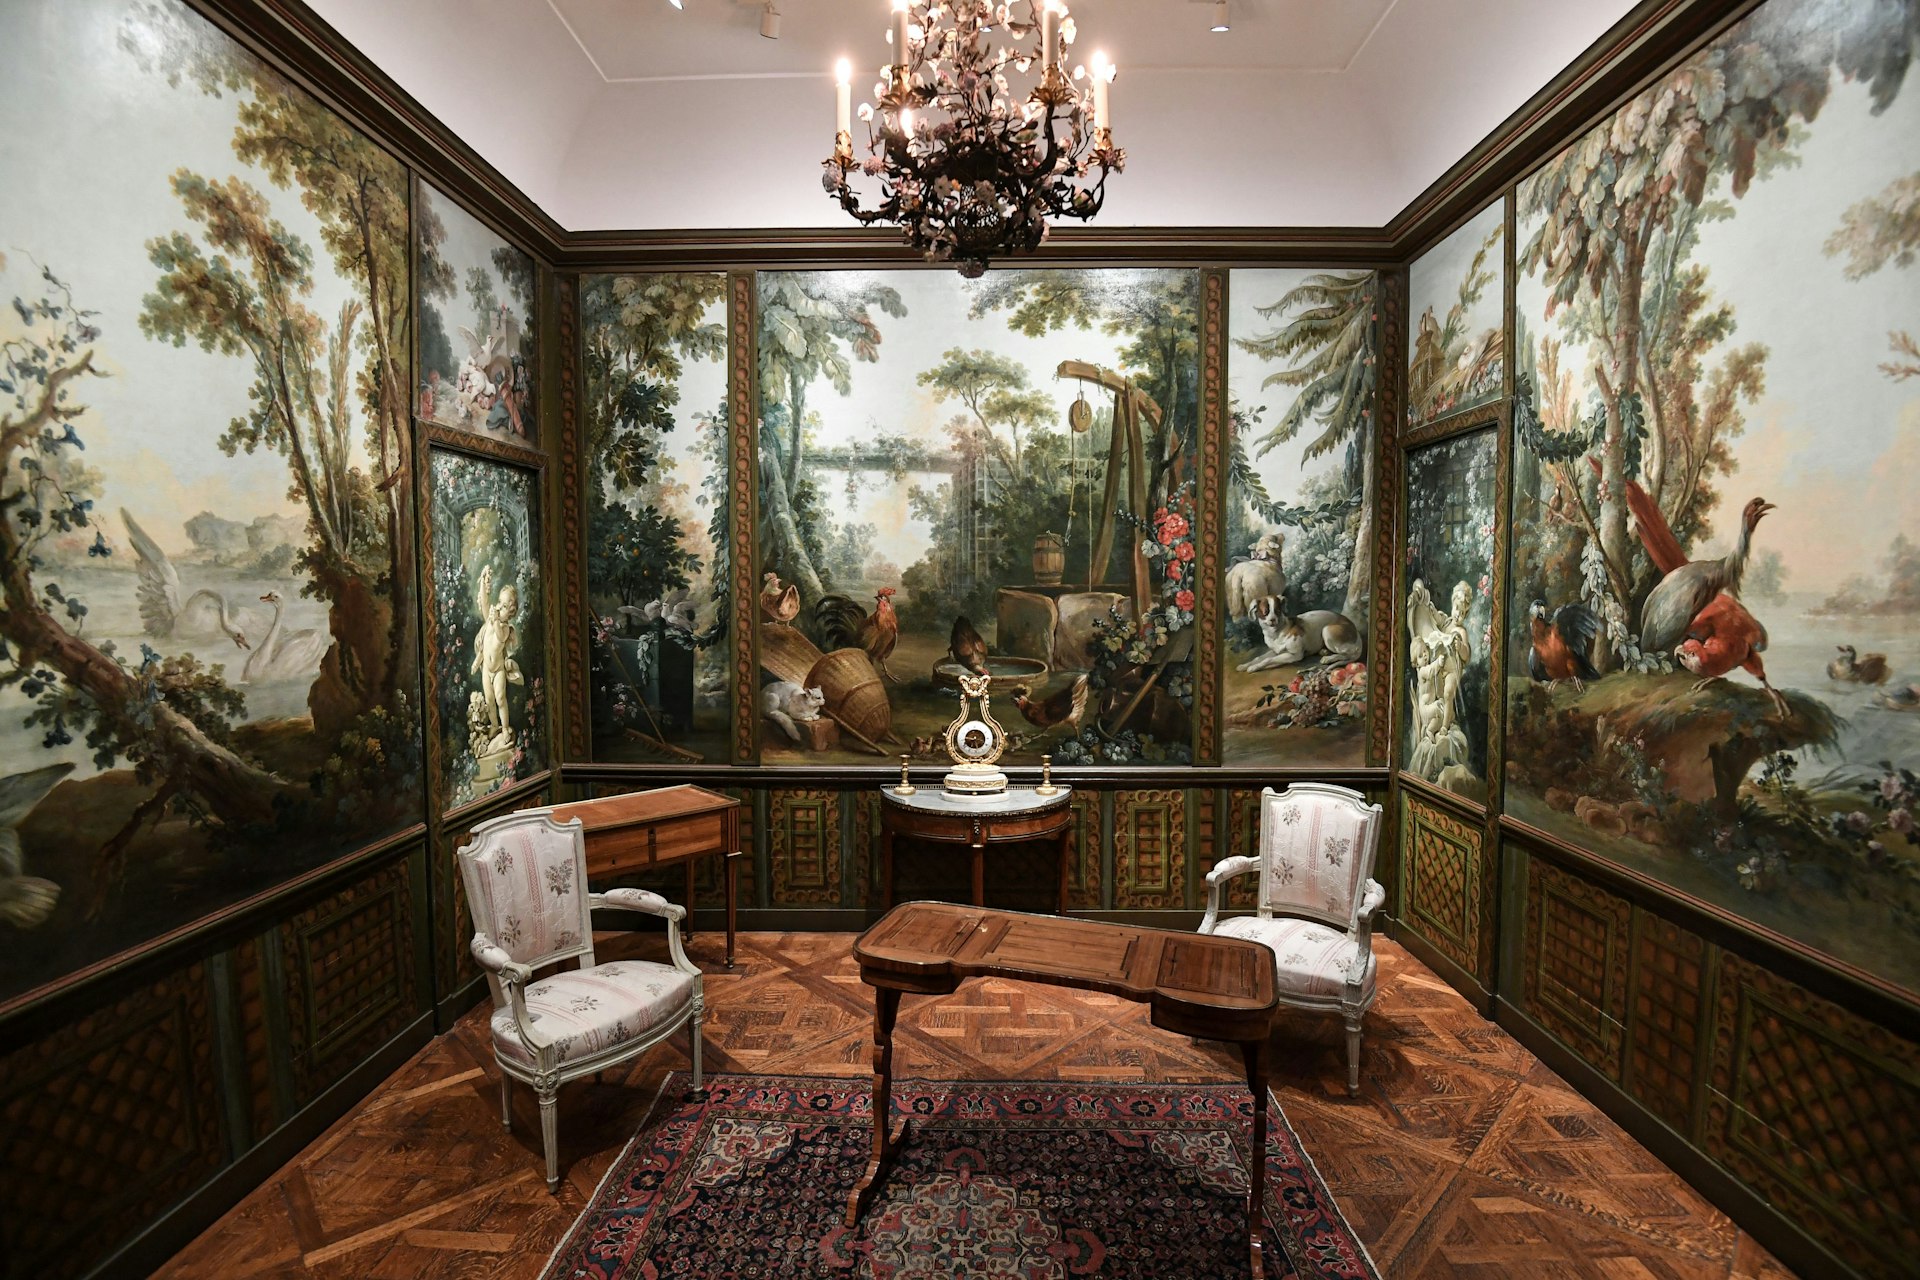 A room with walls painted with murals of woodland and birds, with an ornate table and two chairs in the center 